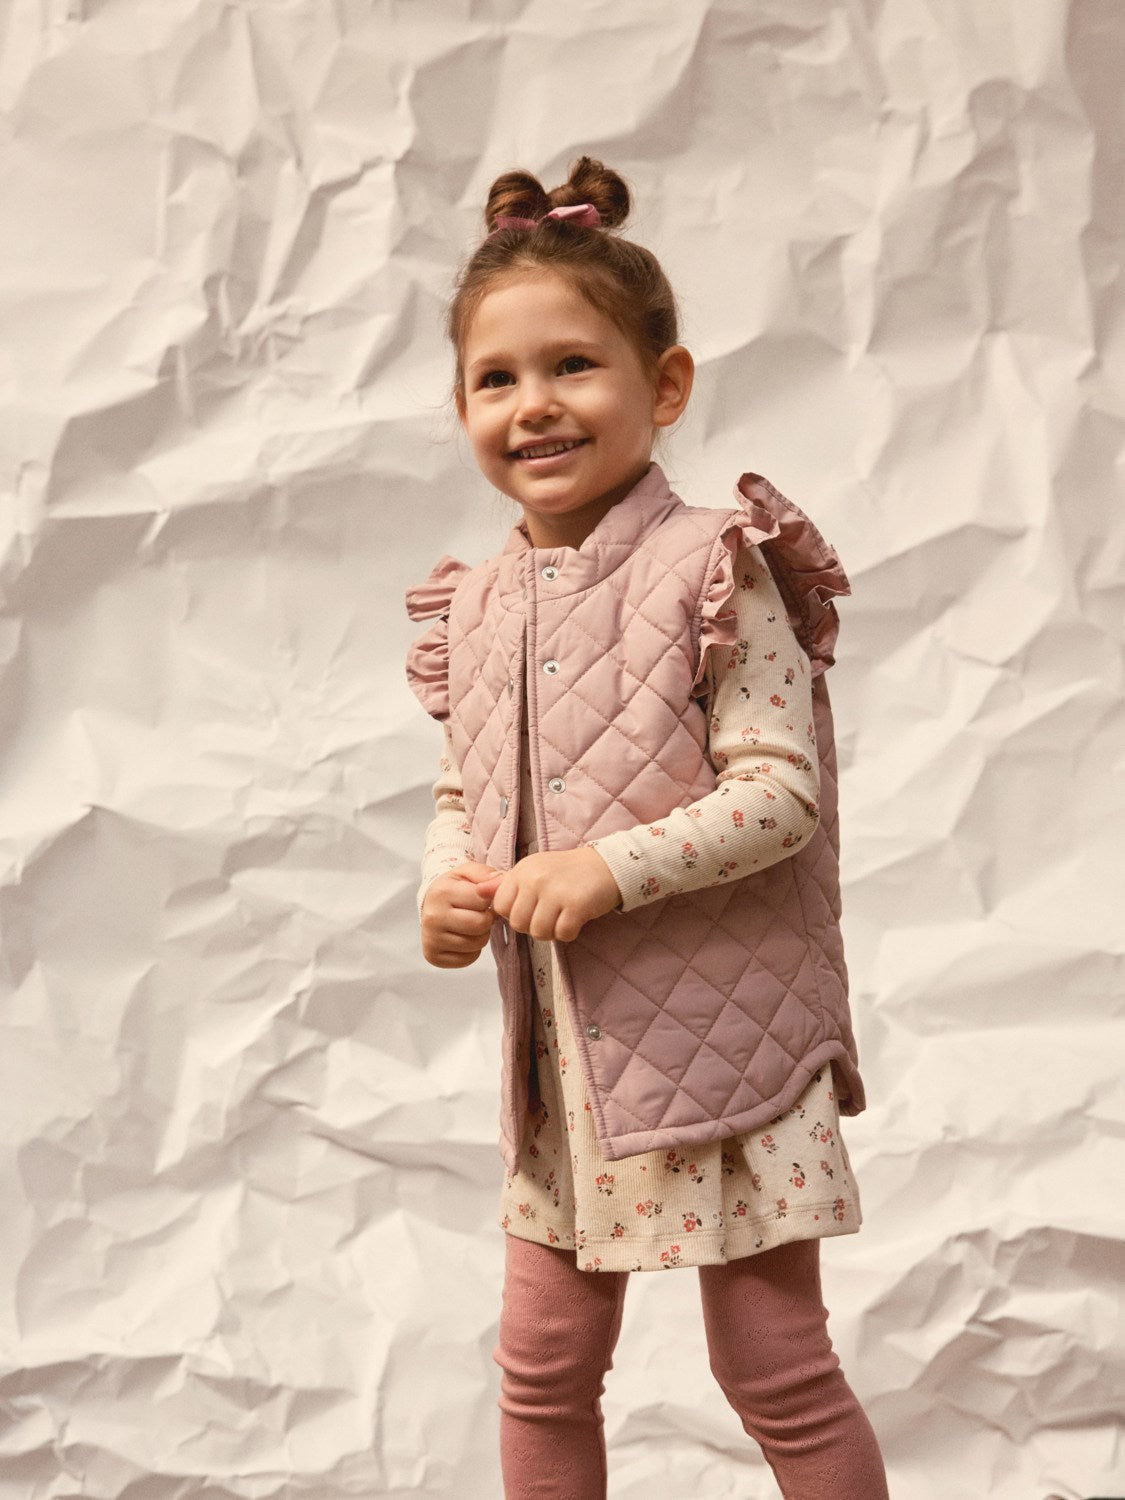 Name It Pink Quilted Ruffle Sleeve Gilet